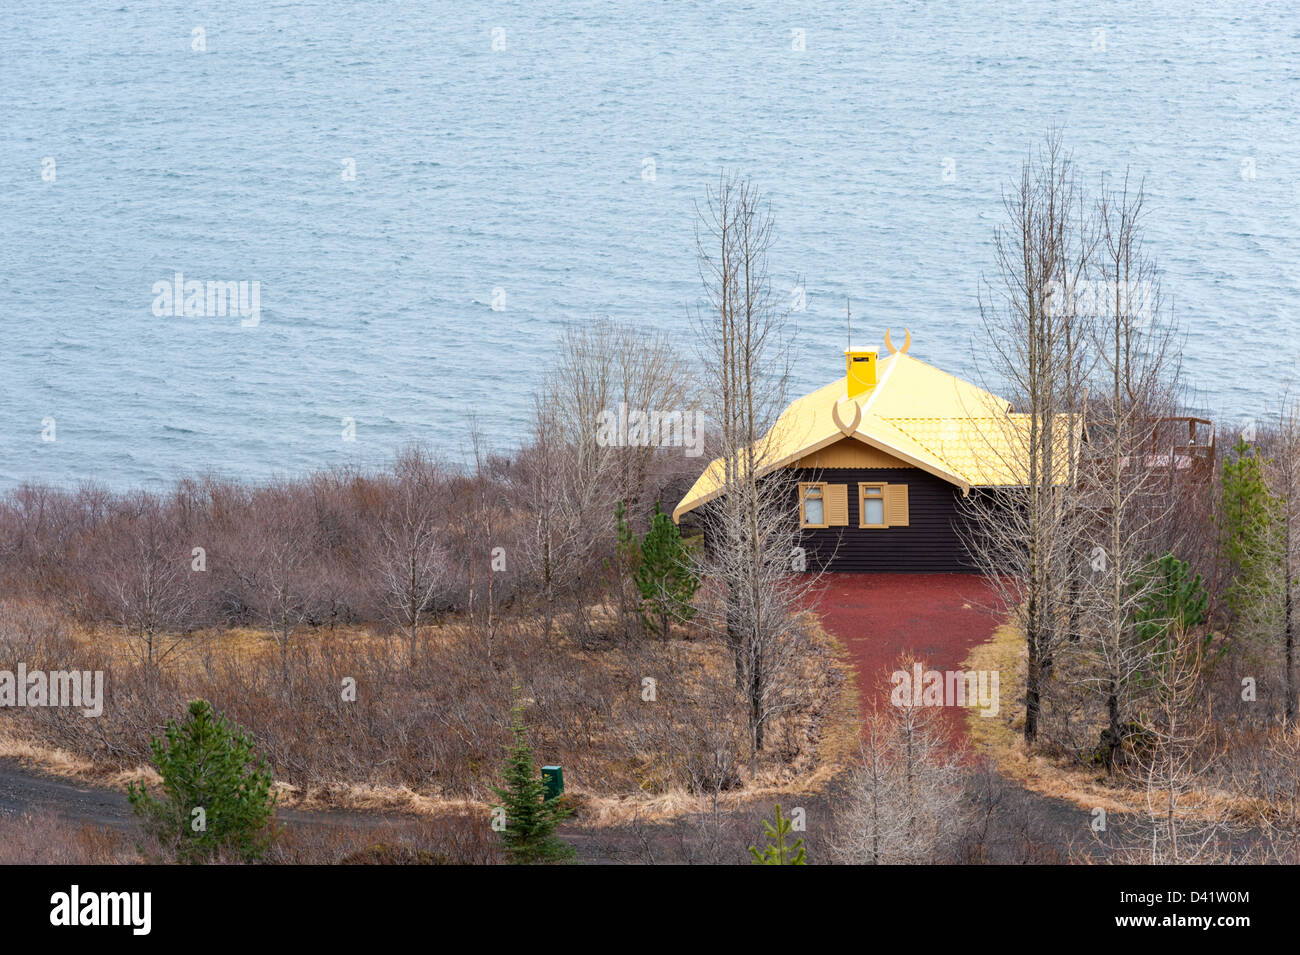 A cabin with a yellow roof on the shore of Lake Thingvallavatn near Reykjavik Iceland Stock Photo